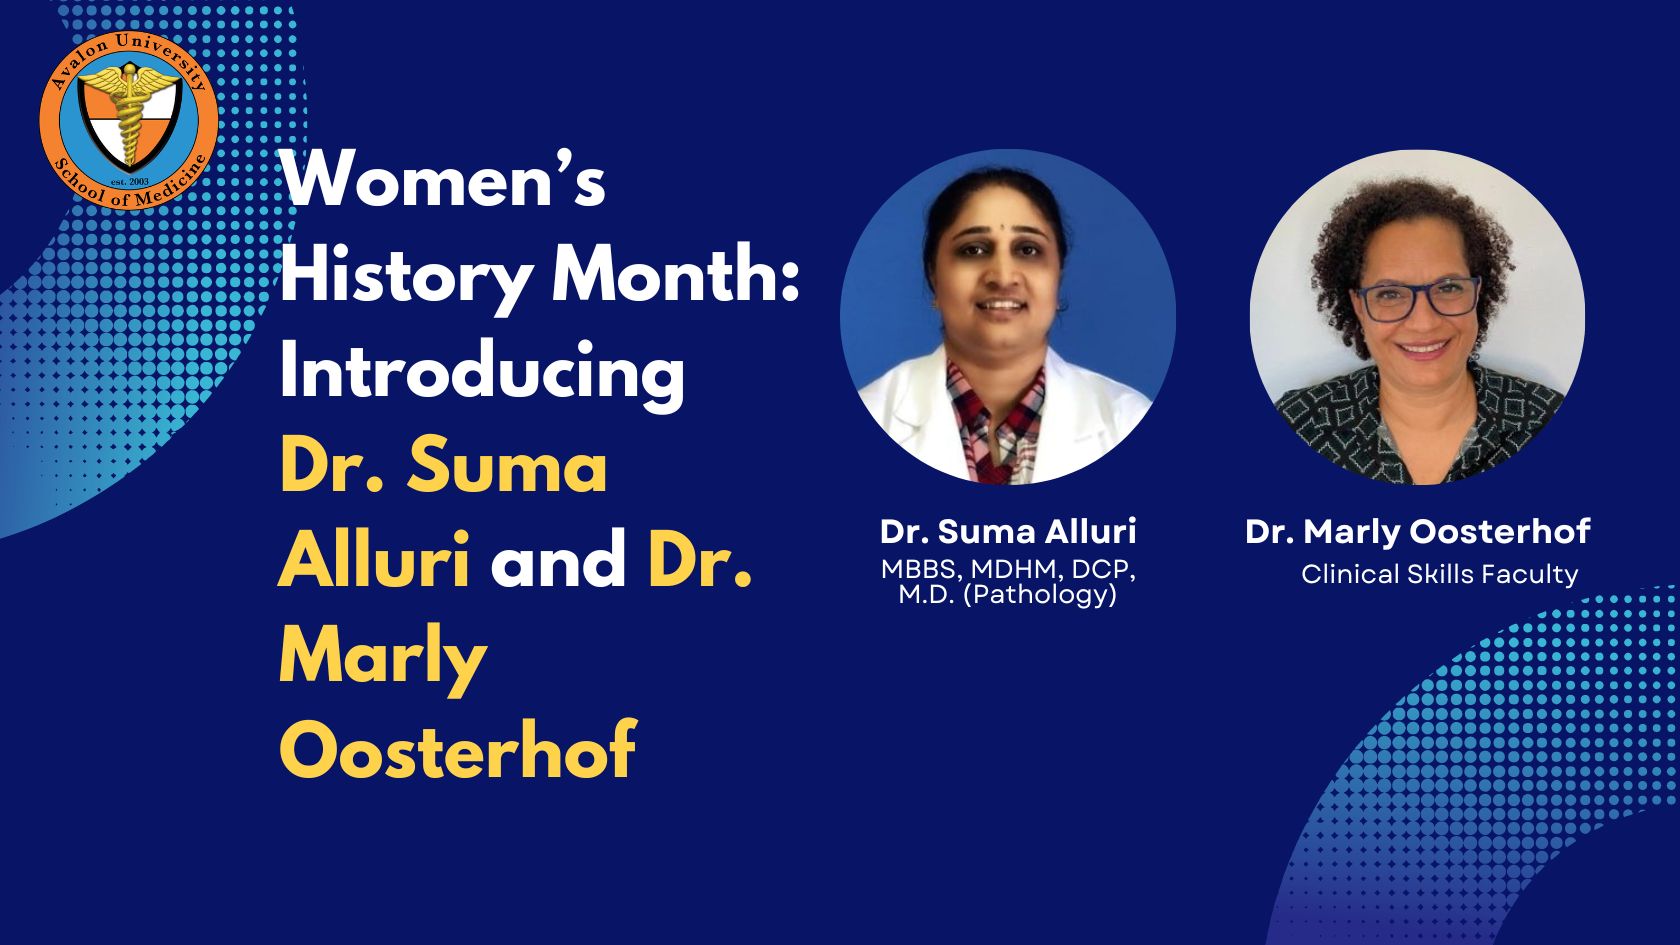 Women’s History Month Introducing Dr. Suma and Dr. Oosterhof